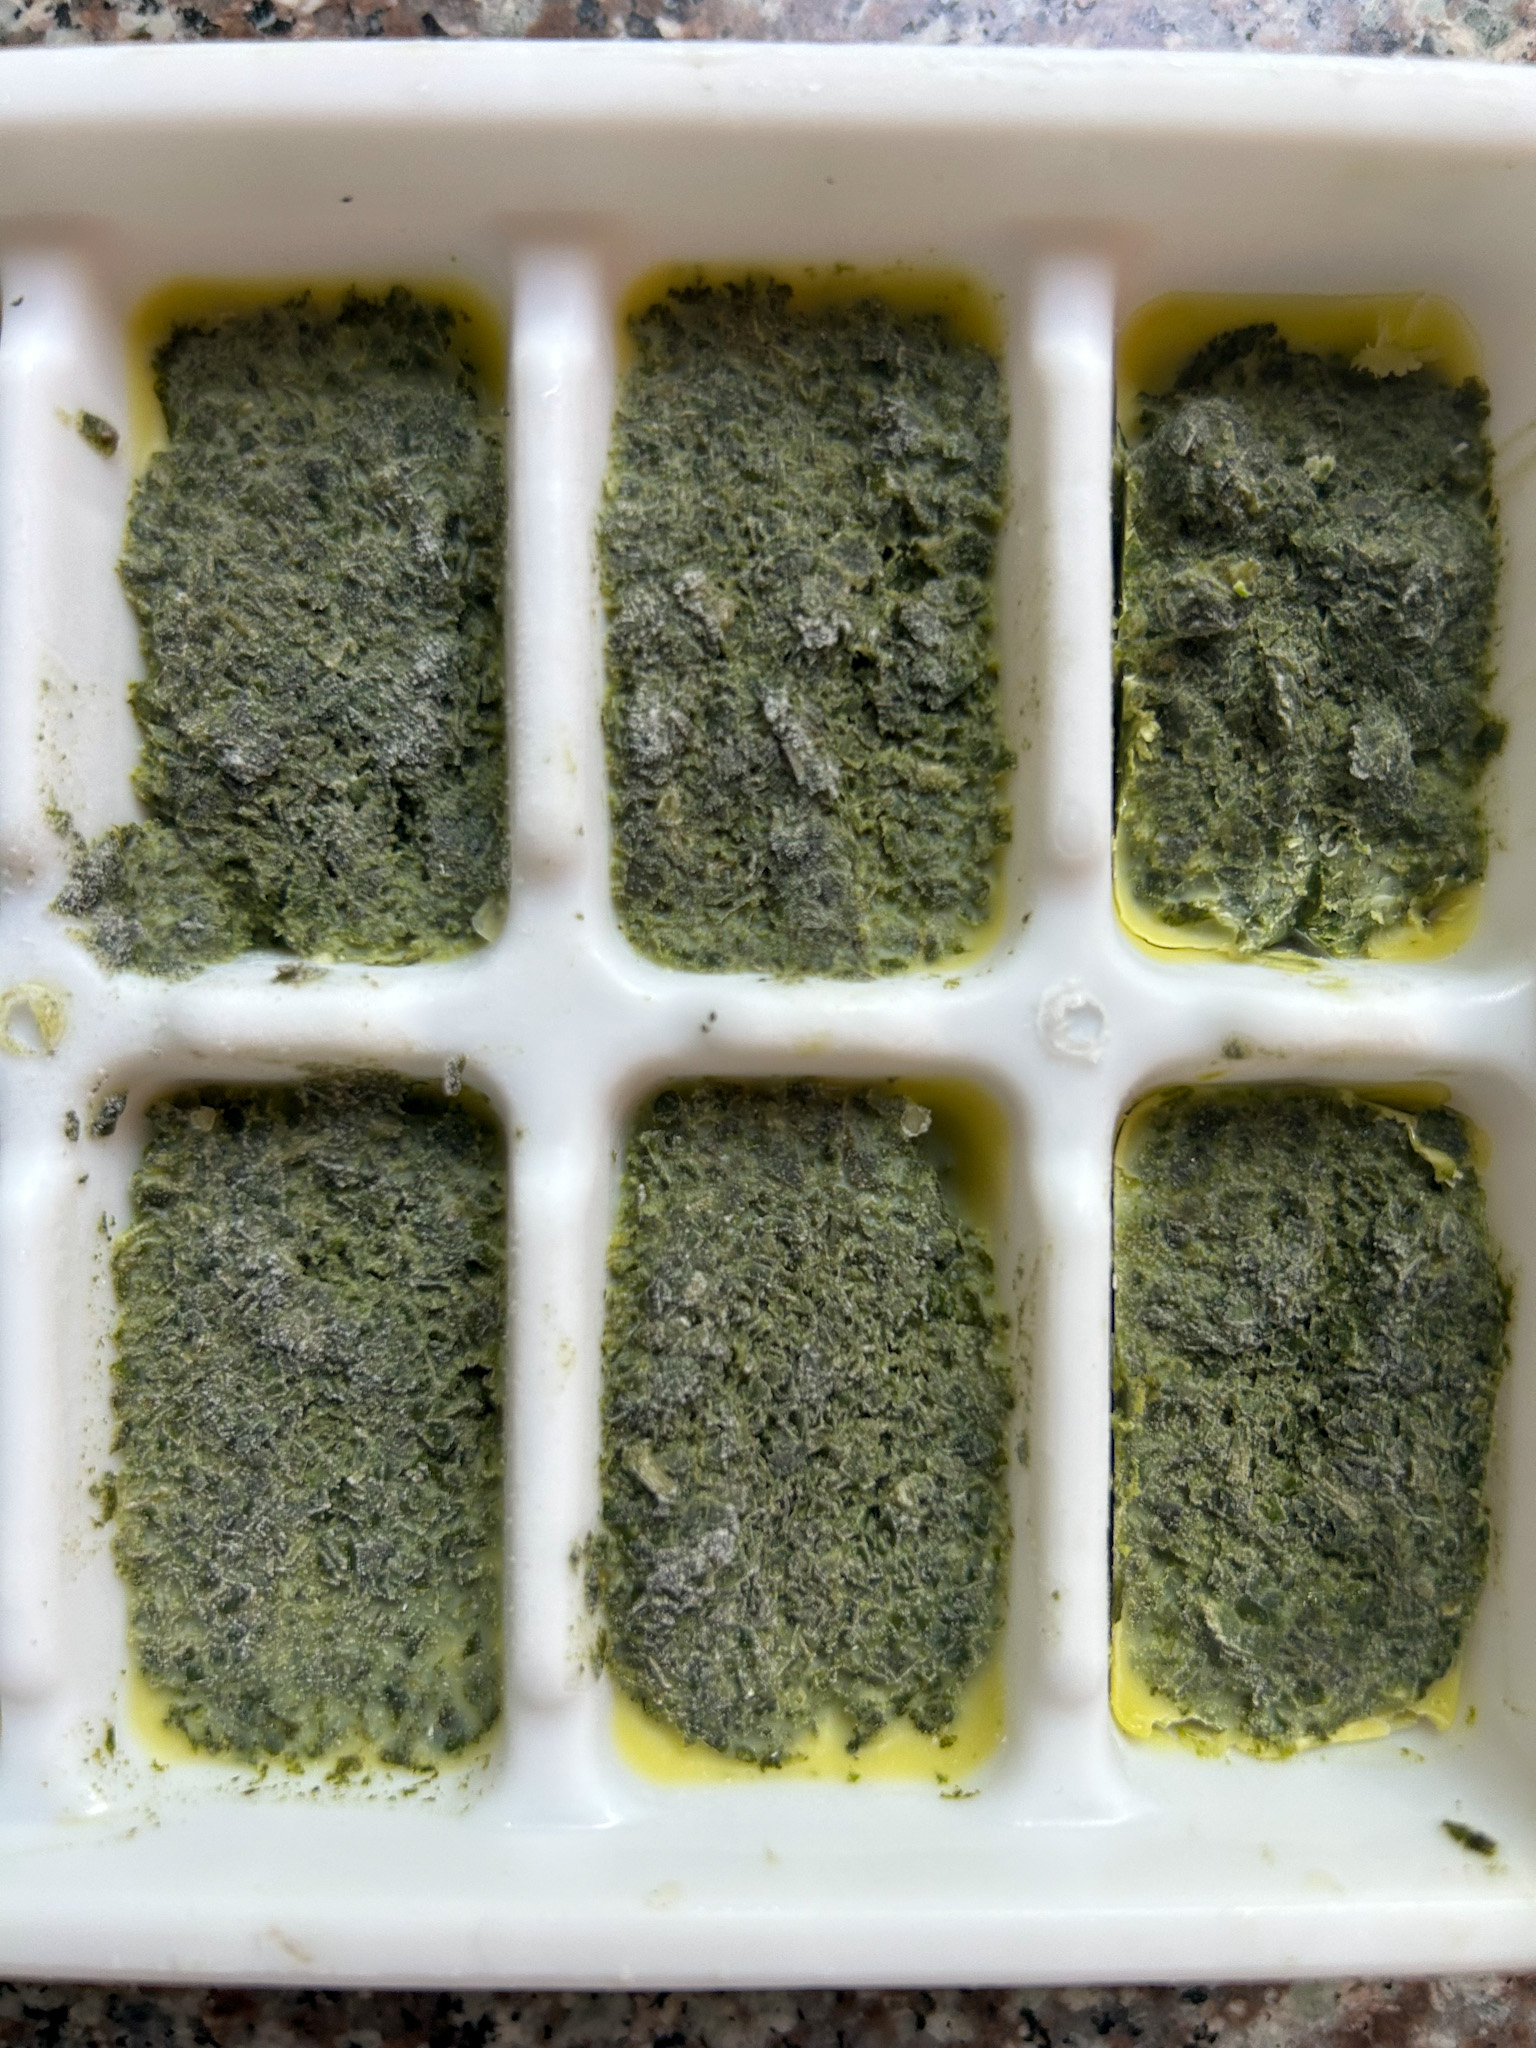 Frozen chopped basil with olive oil in ice cube tray.